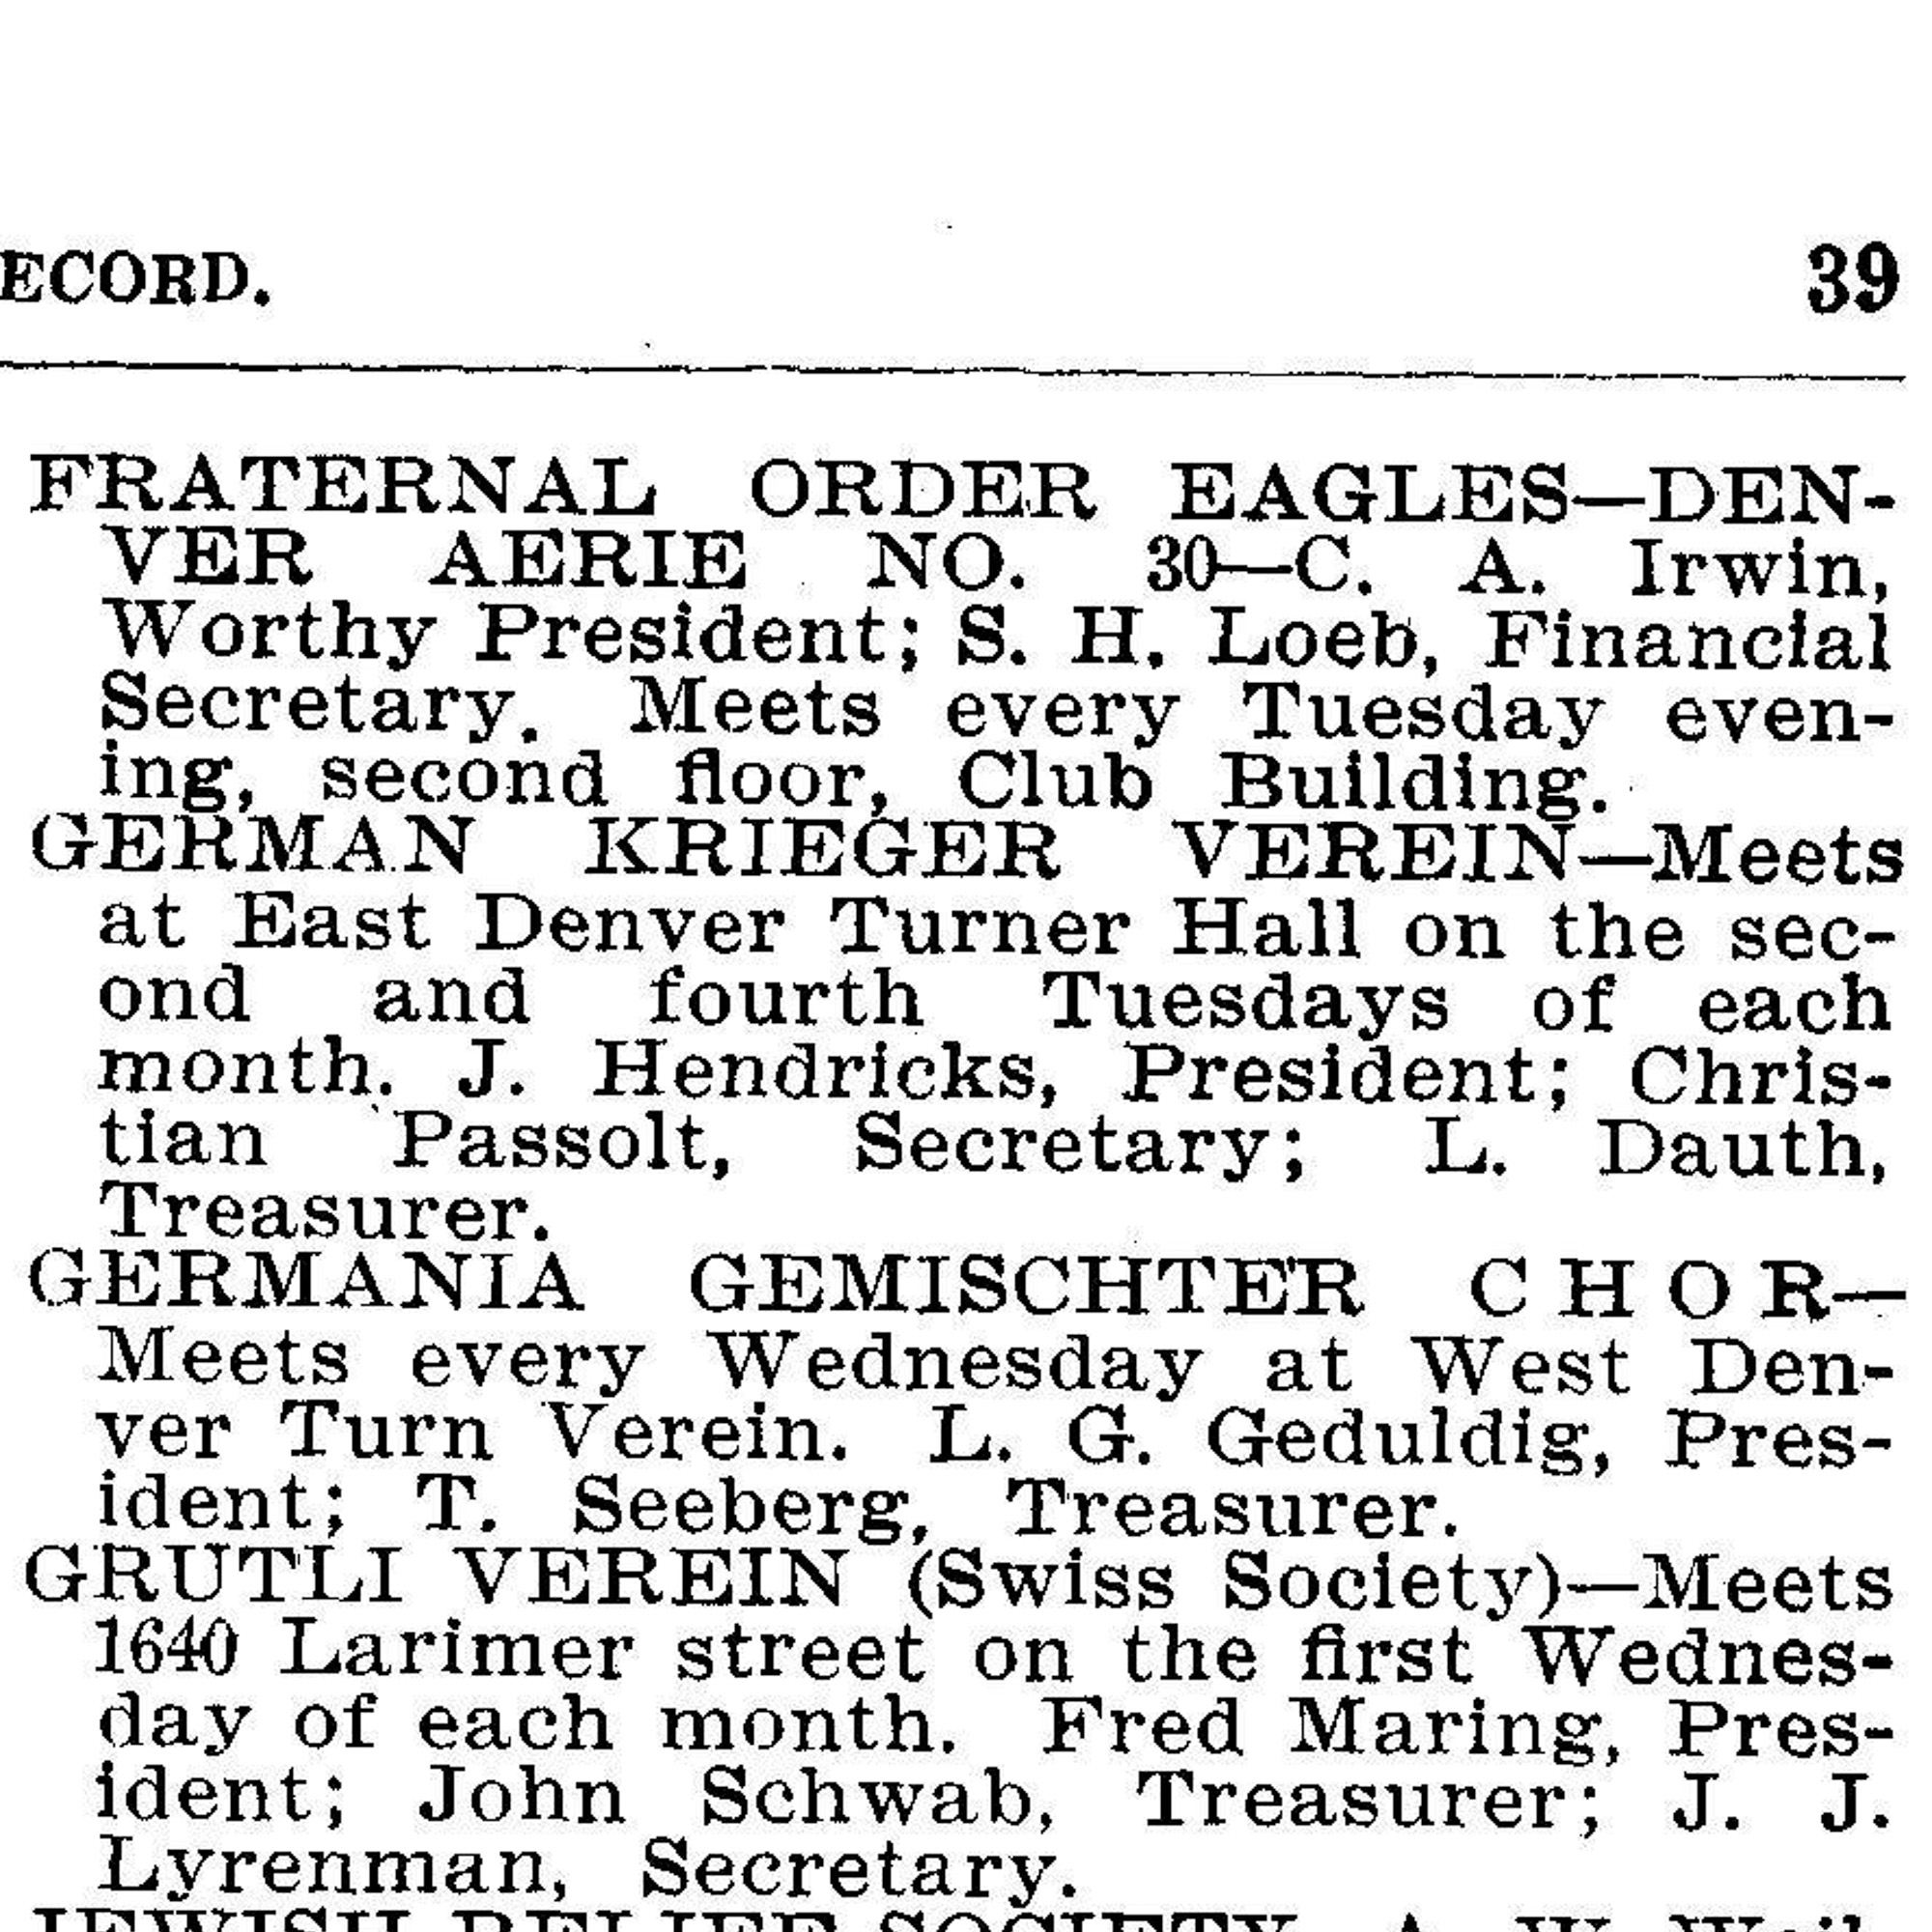 Dauth Family Archive - 1907 - Denver Directory - Entry For German Krieger Verein